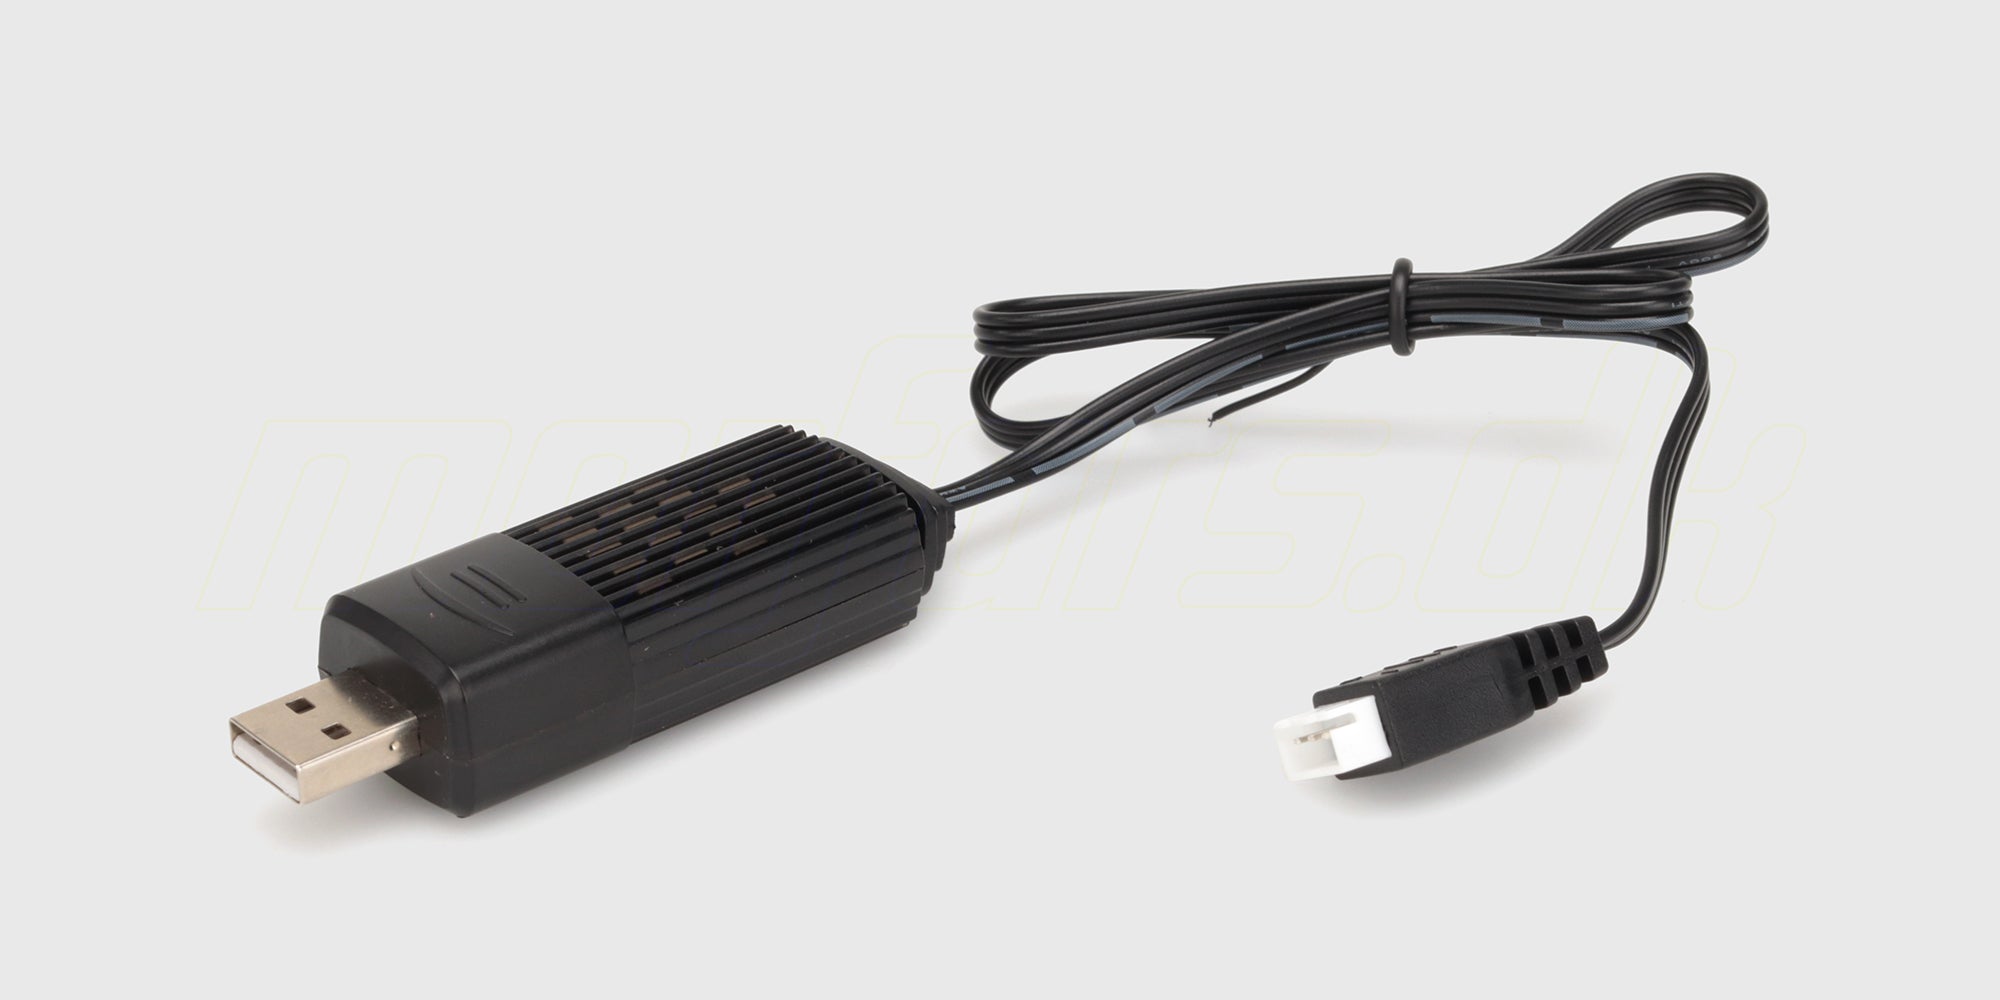 HyperGo USB charging cable